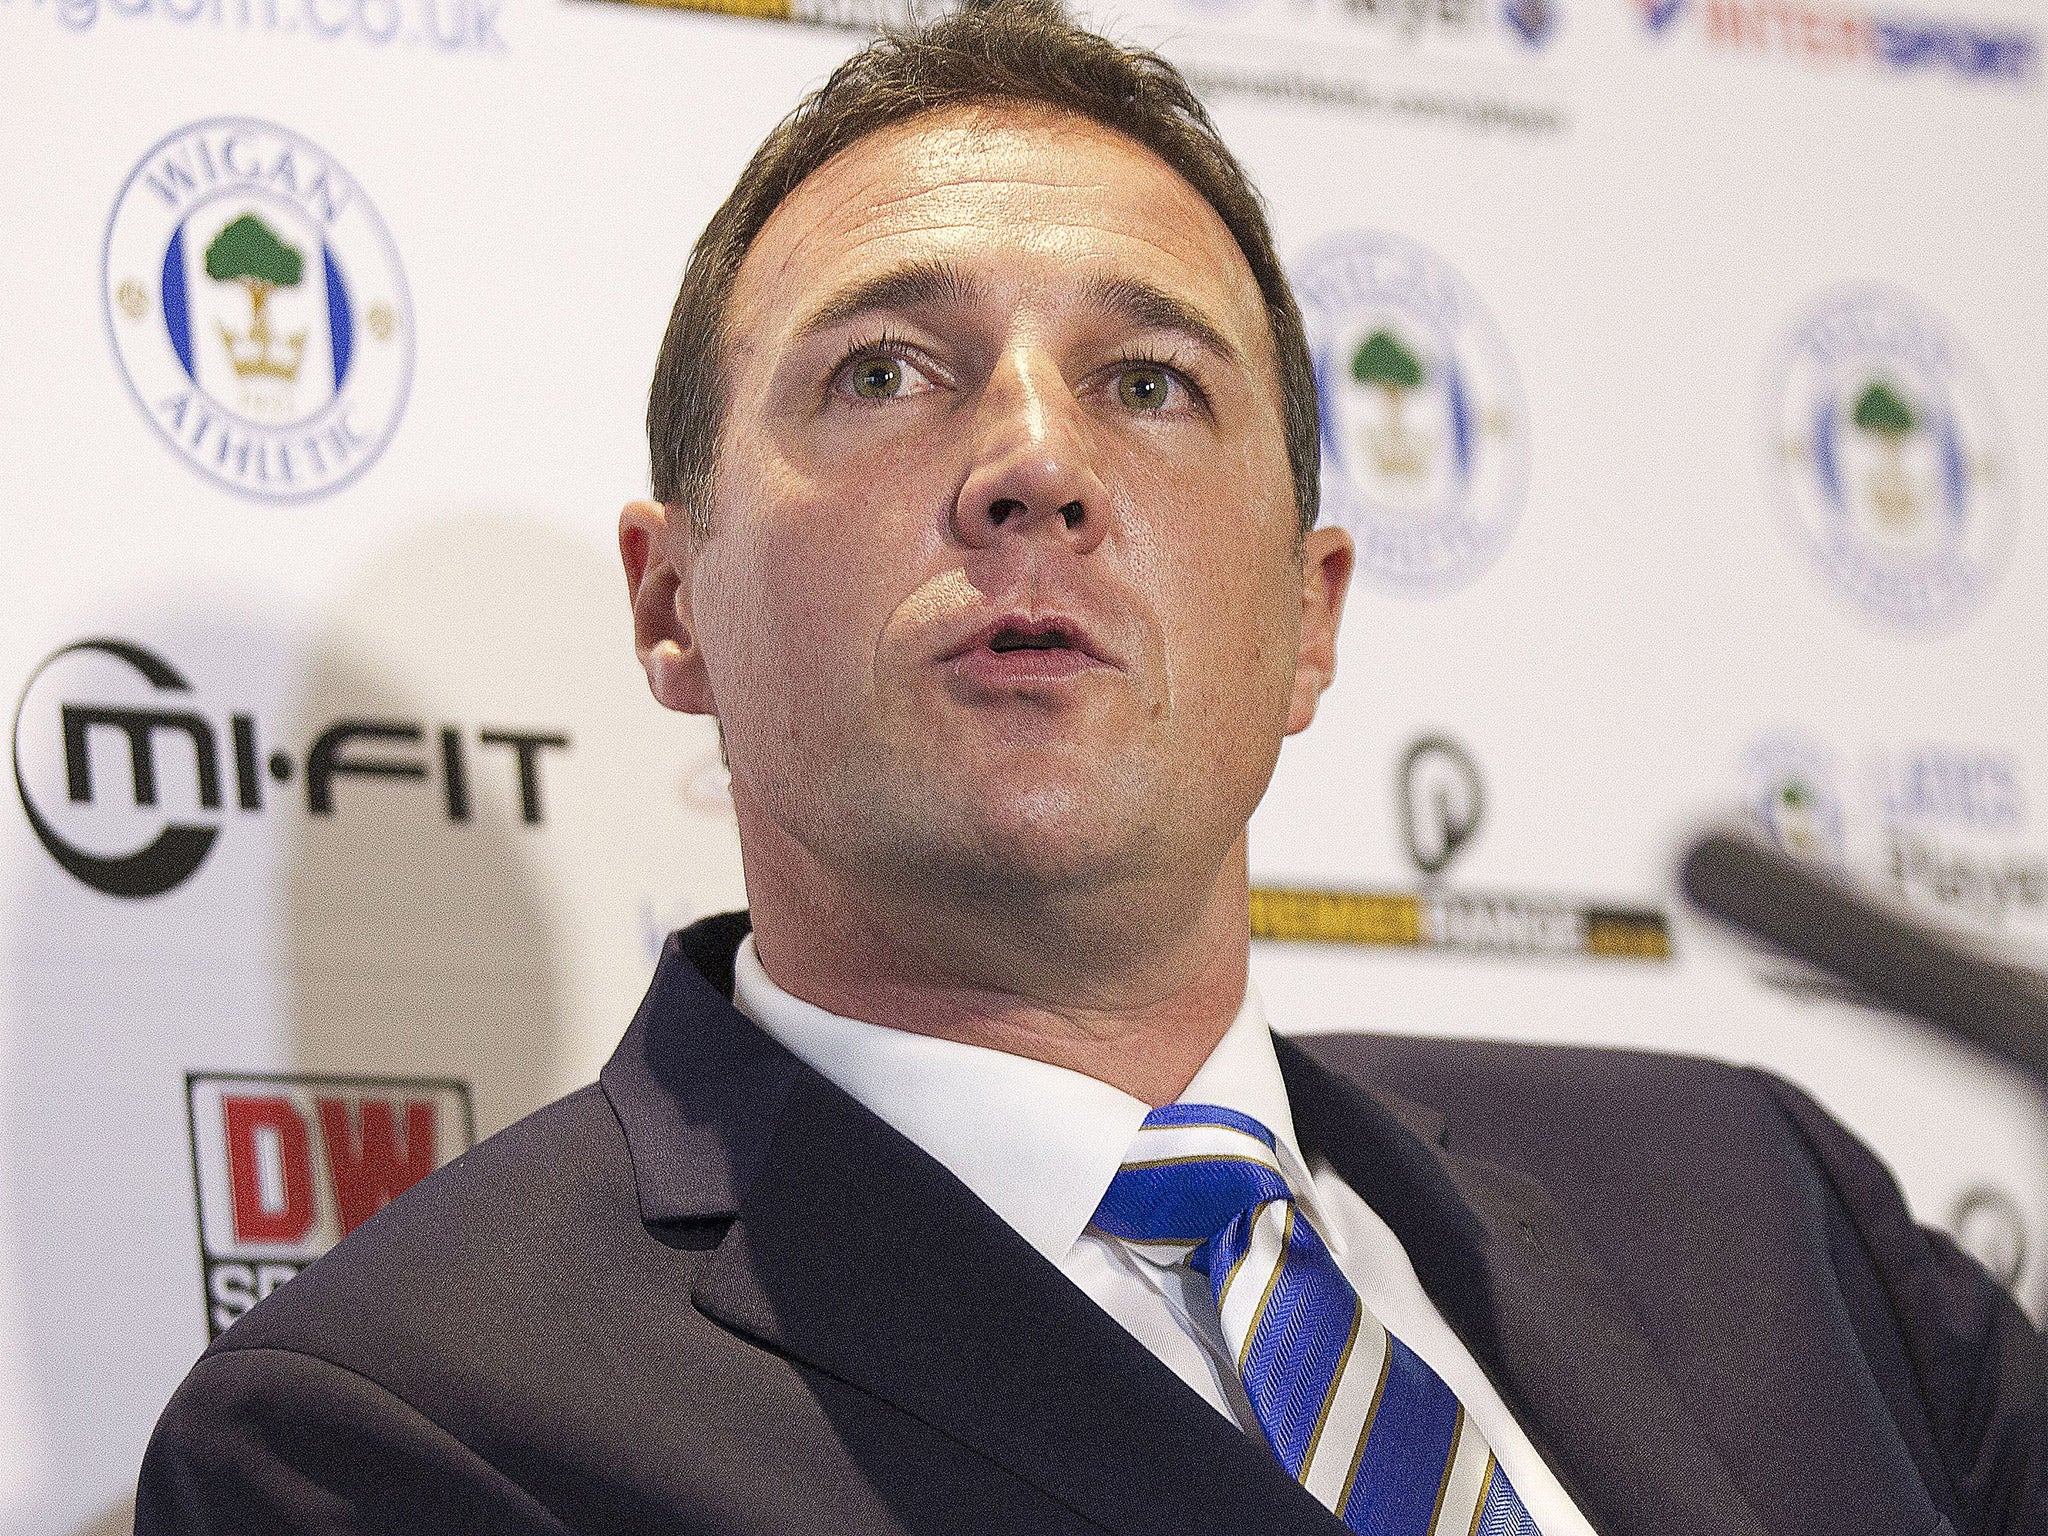 Malky Mackay said 'I made mistakes but I'm absolutely not racist' about the Cardiff text storm